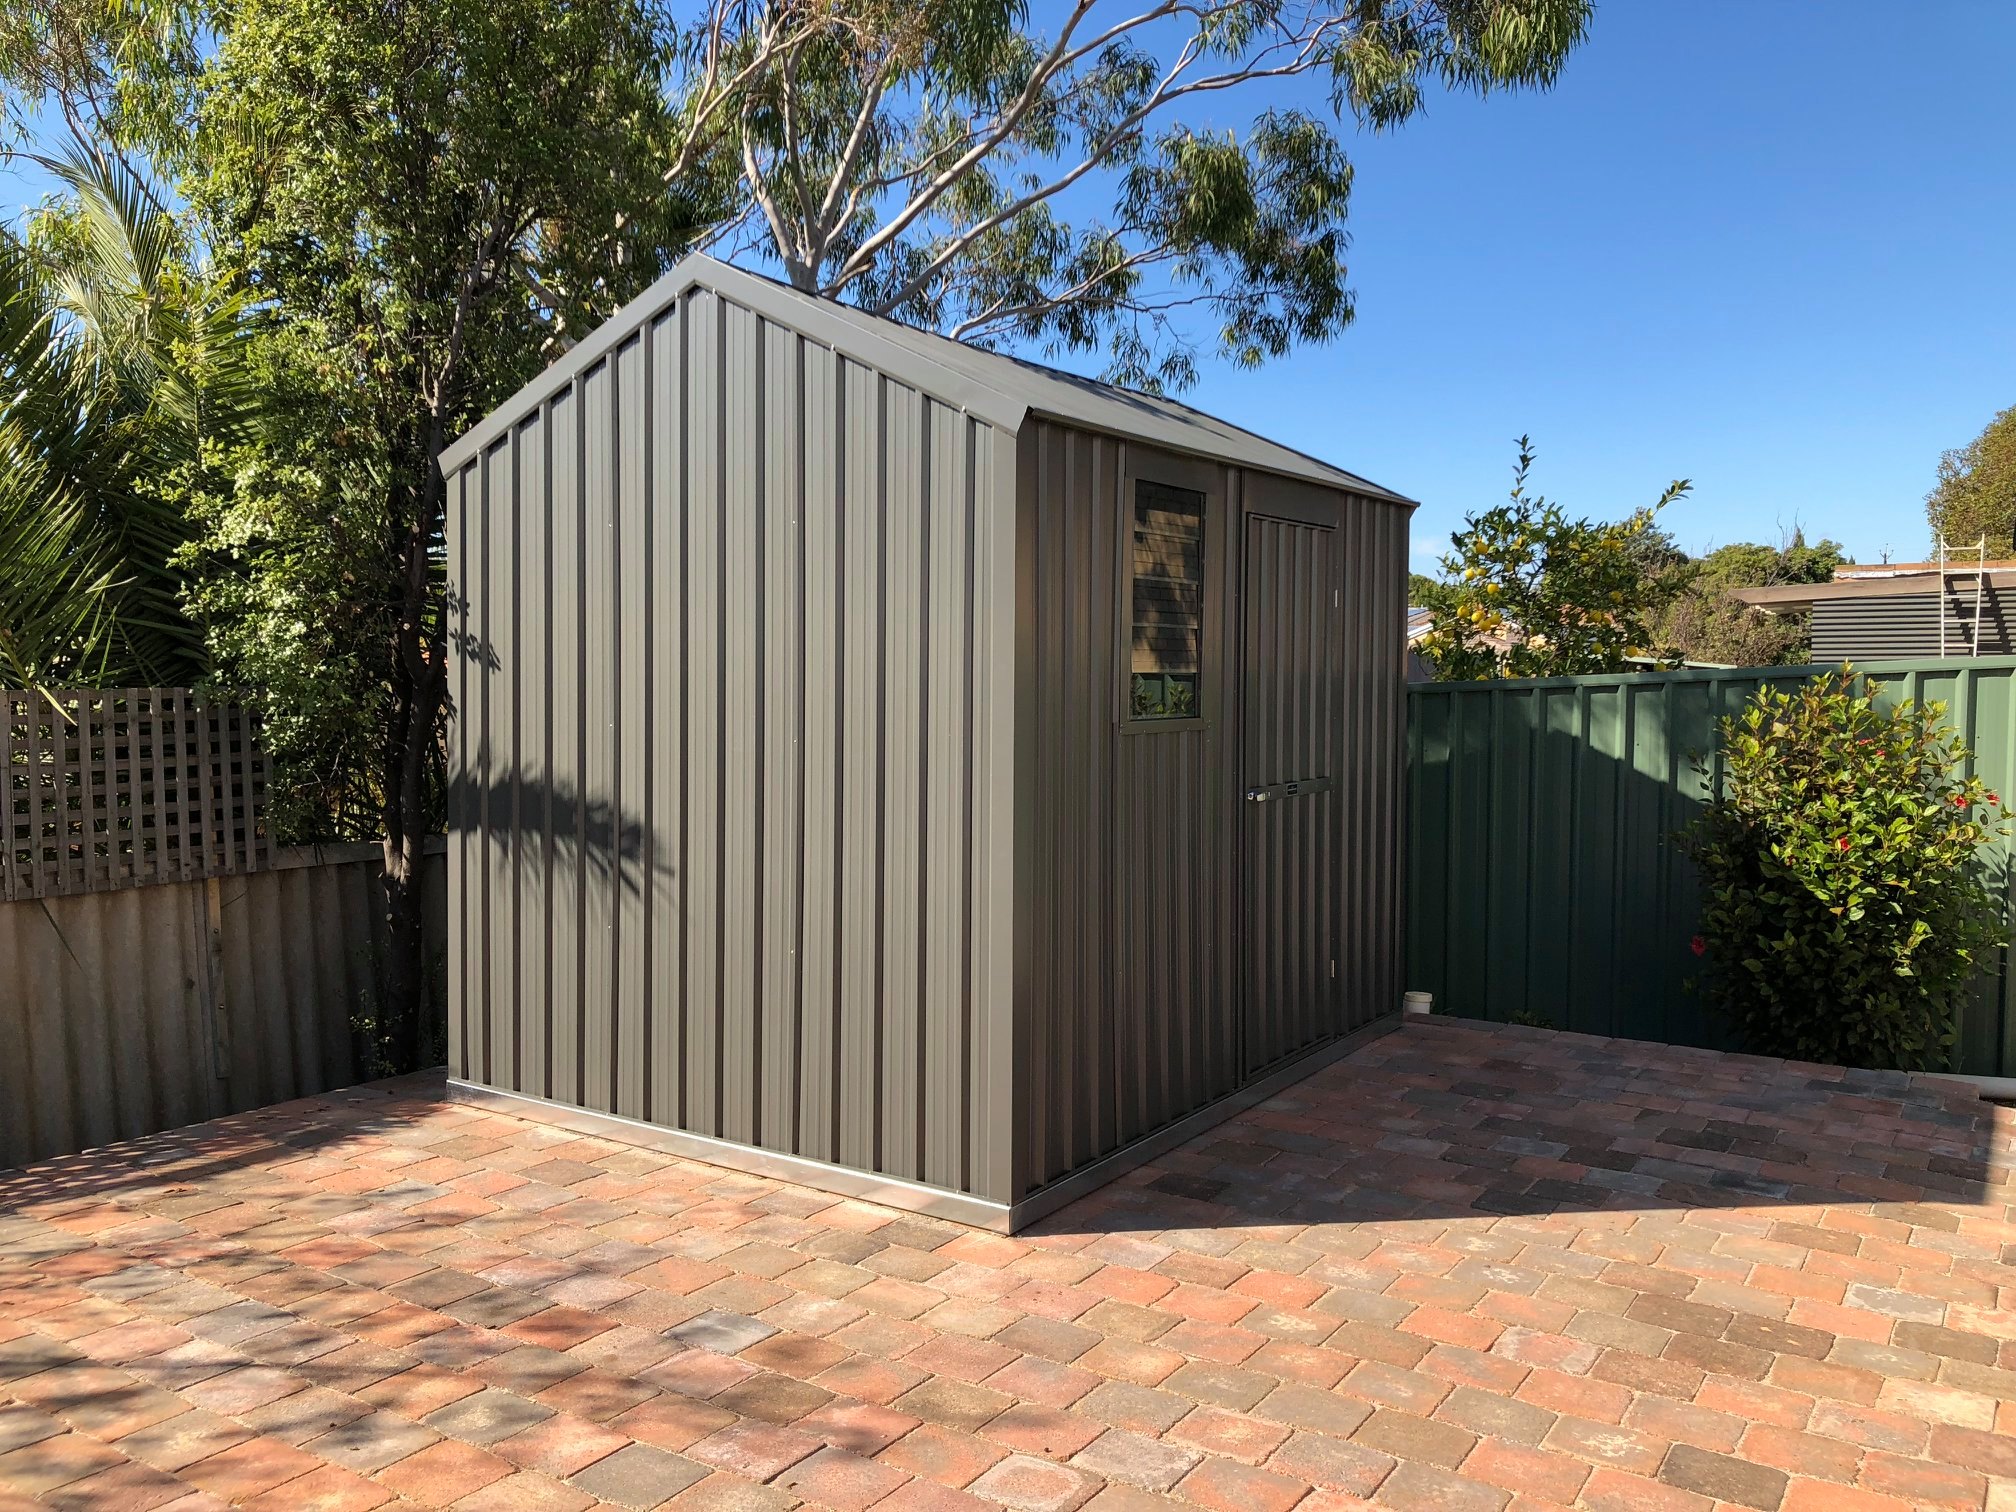 Image of a gray shed in the outdoor